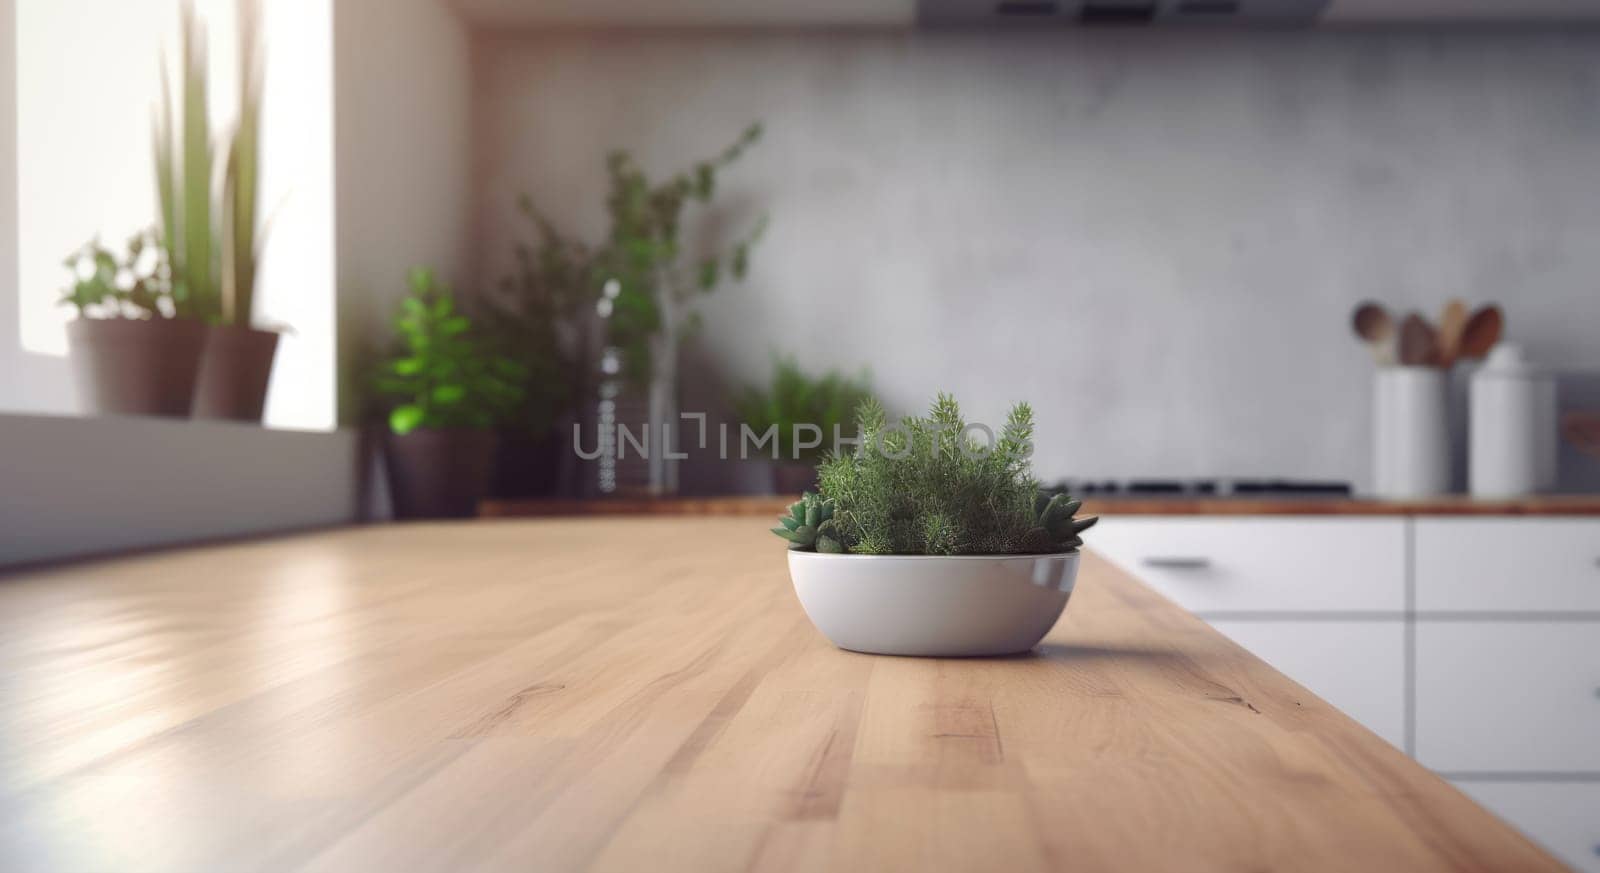 wood table top and blur bokeh modern kitchen interior with window background with green plants in pots